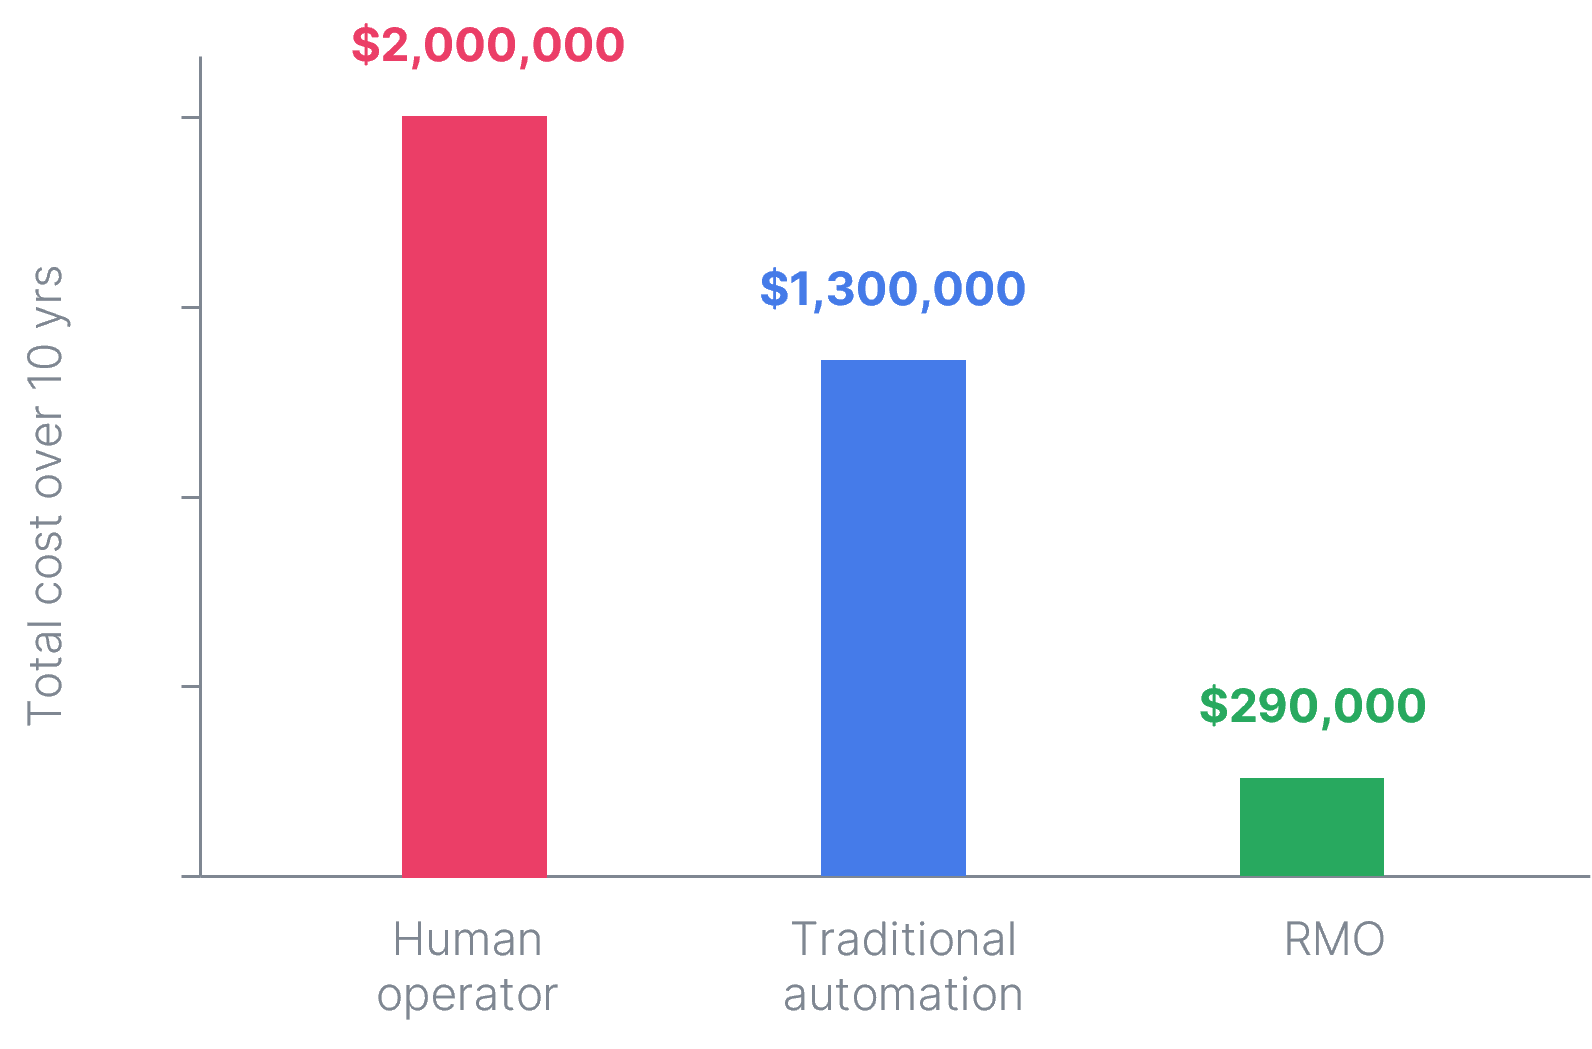 A chart describing the cost of an RMO over 10 years versus the cost of human labor or traditional automation.